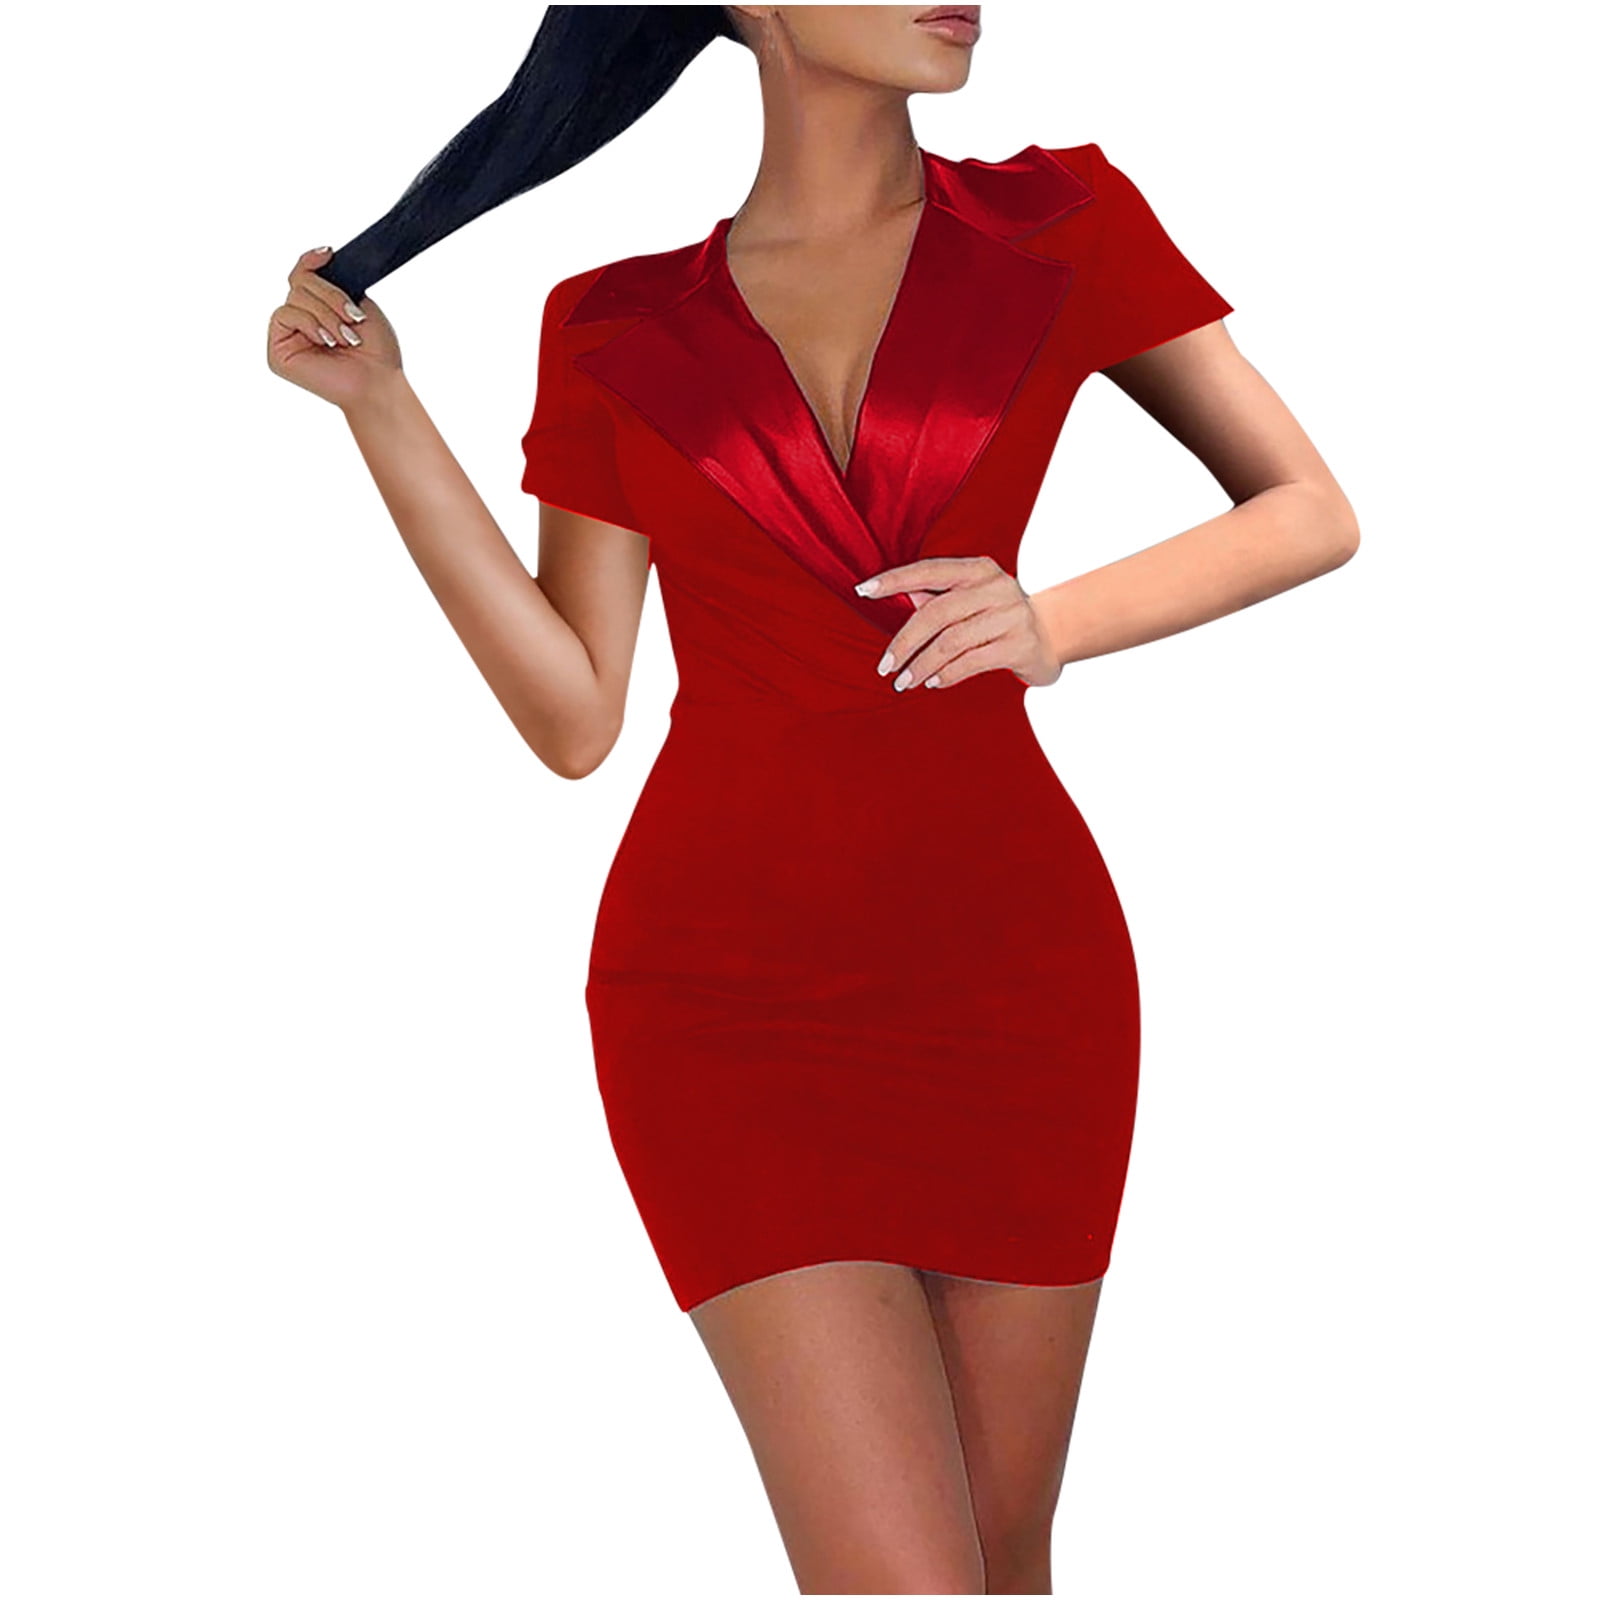 Trendy Women's Clothing - Dresses, Shoes, and Accessories Online – Page 7 –  Red Dress